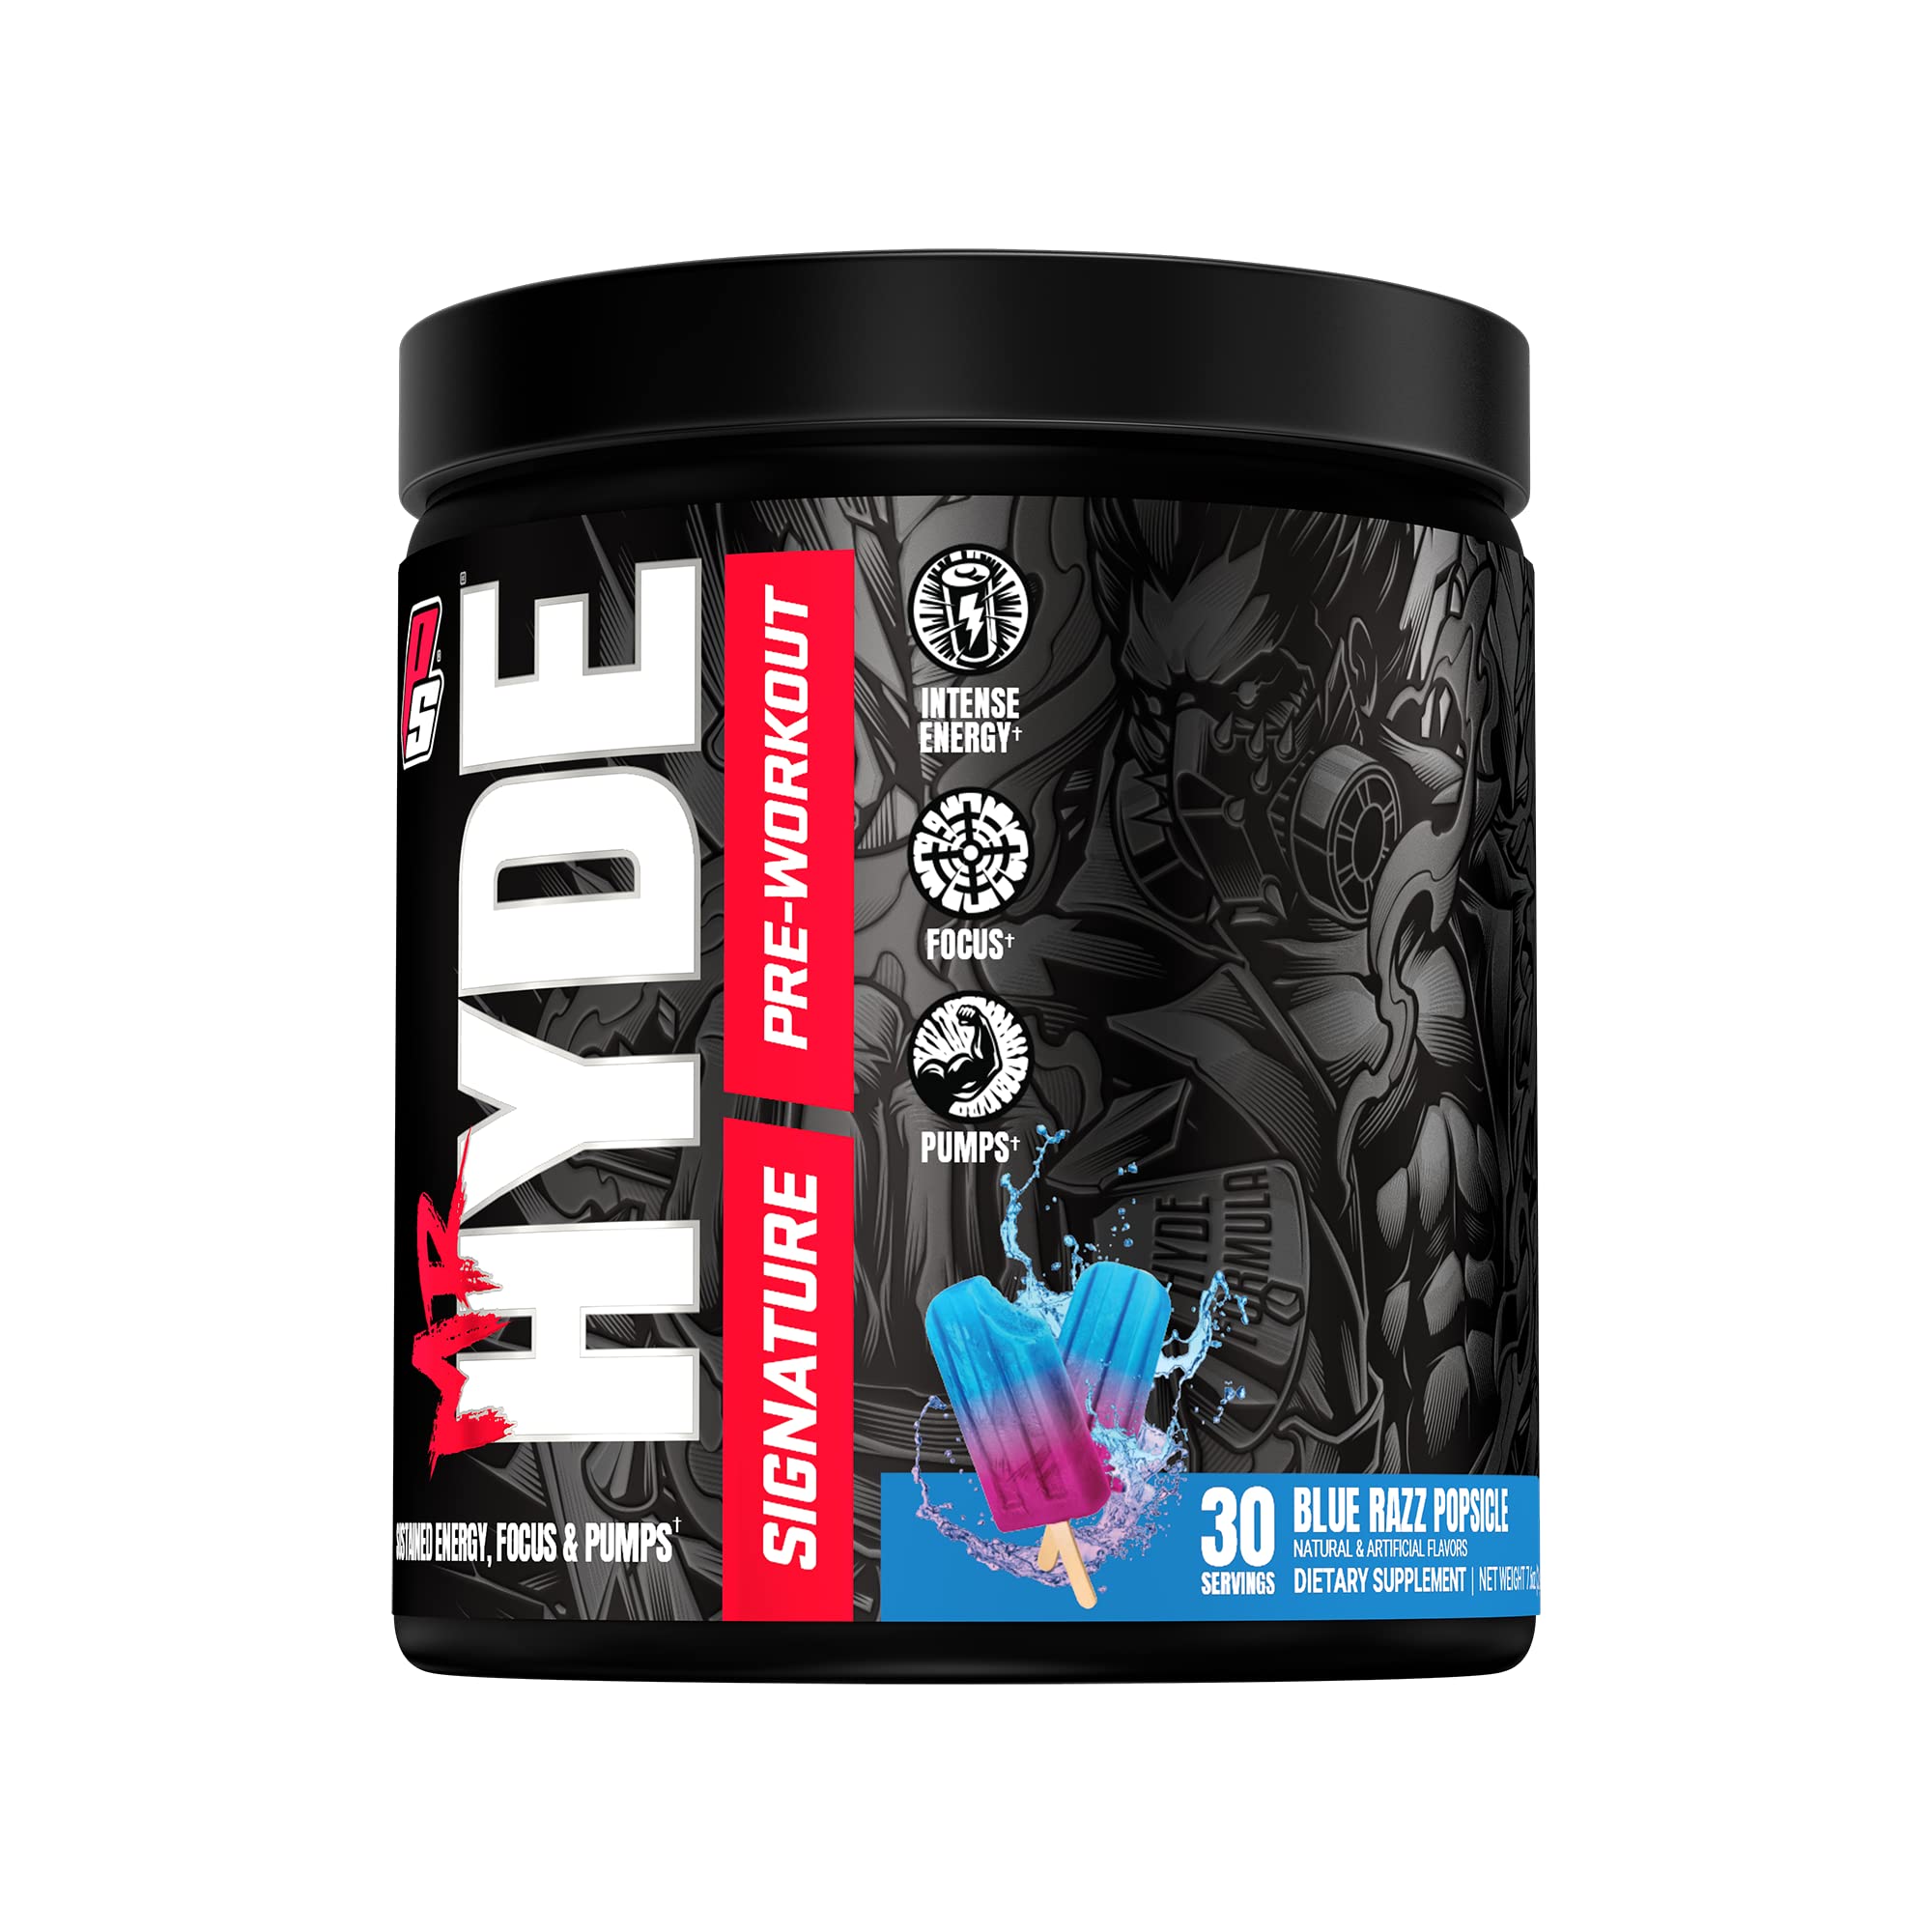 Book Cover PROSUPPS Mr. Hyde Signature Pre Workout with Creatine, Beta Alanine, TeaCrine and Caffeine for Sustained Energy, Focus and Pumps - Pre-Workout Energy Drink for Men and Women (Blue Razz, 30 Servings) Blue Razz 30.0 Servings (Pack of 1)